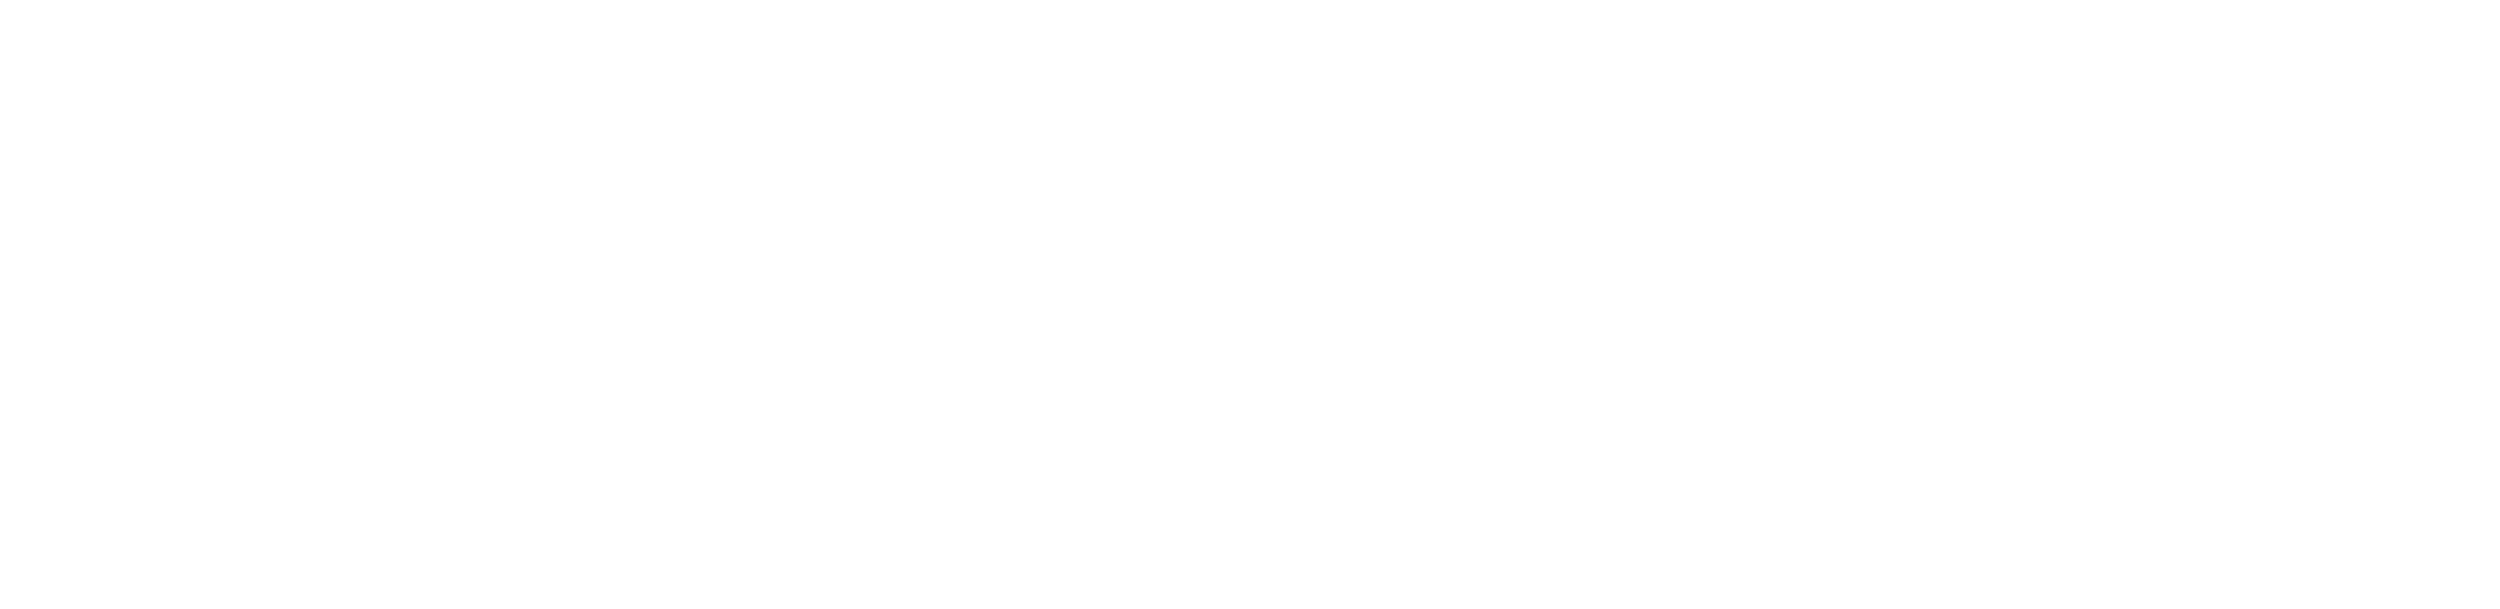 Cryogenic Industrial Solutions